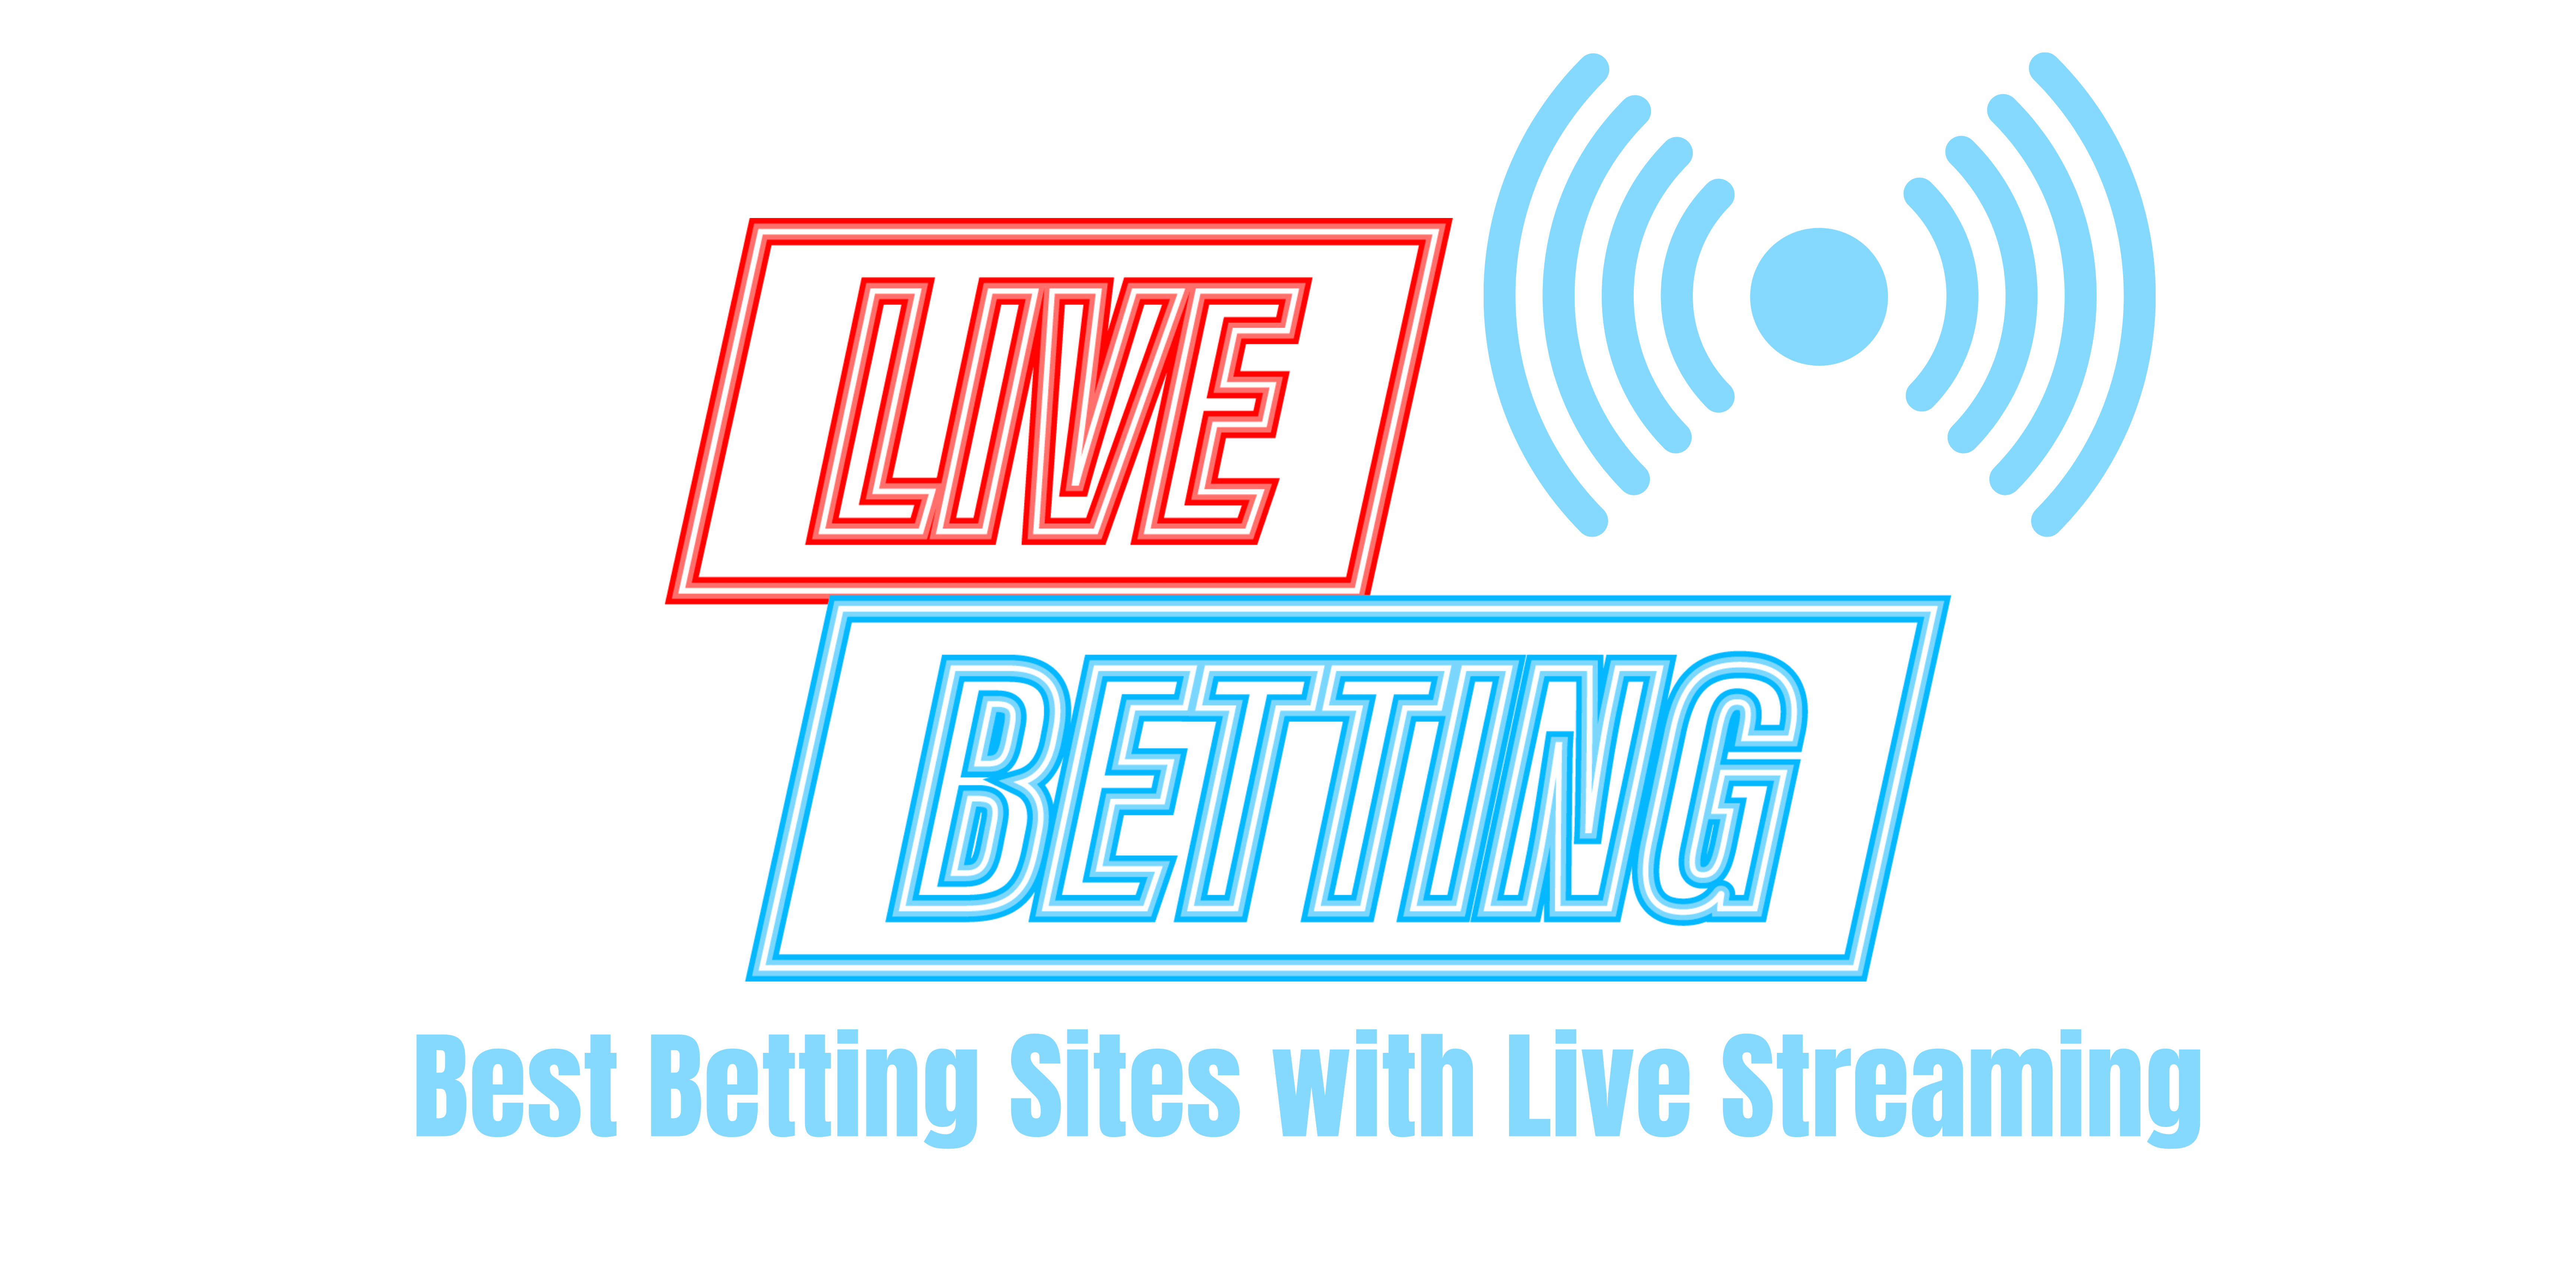 Betting sites with Live streaming